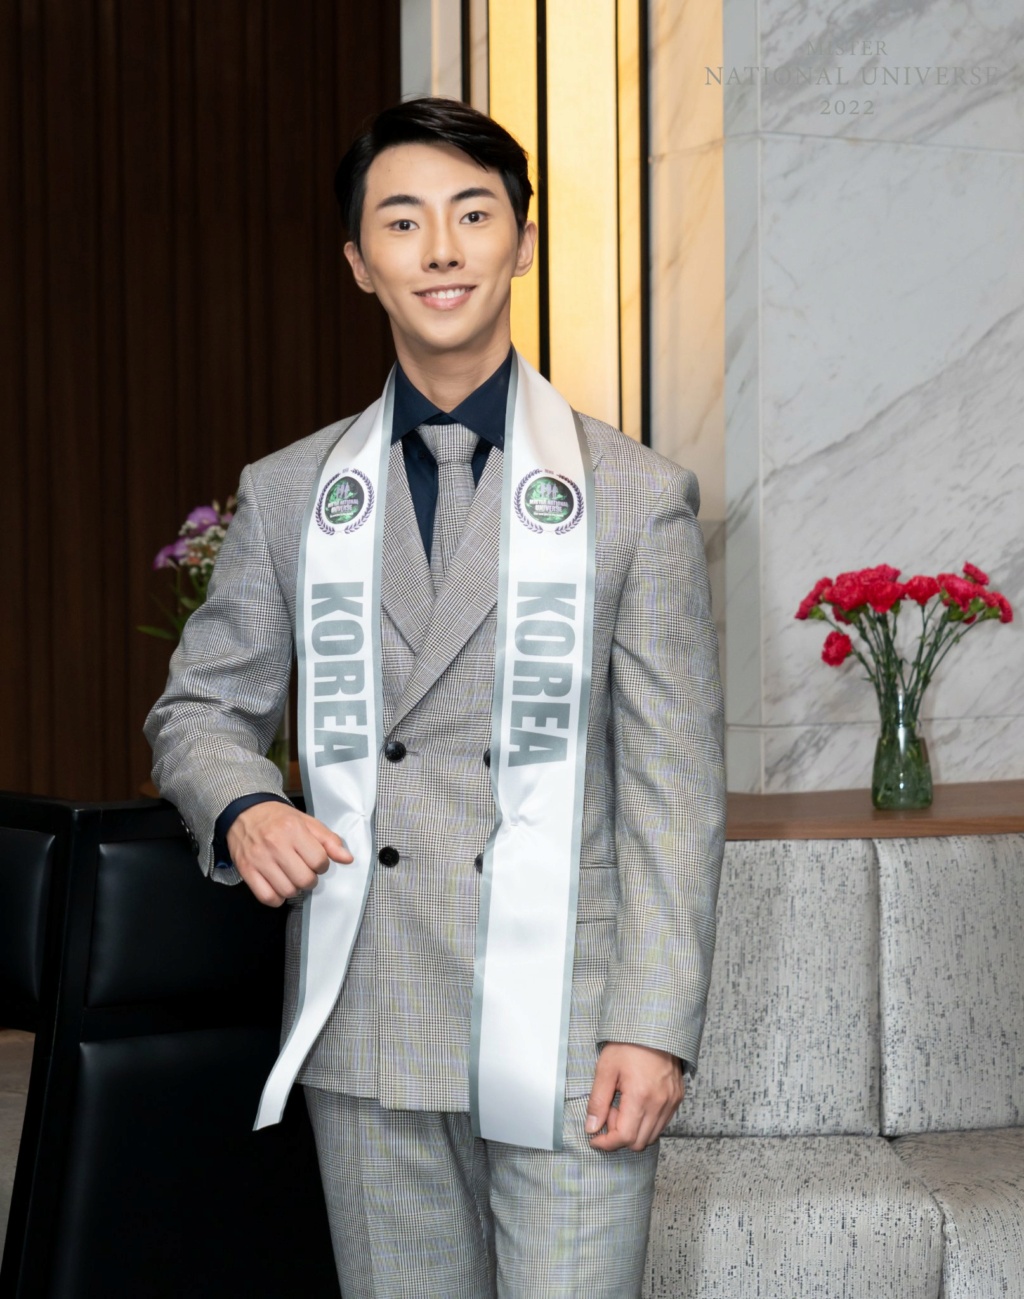 Mister National Universe 2022 is Việt Hoàng from Vietnam 28499811